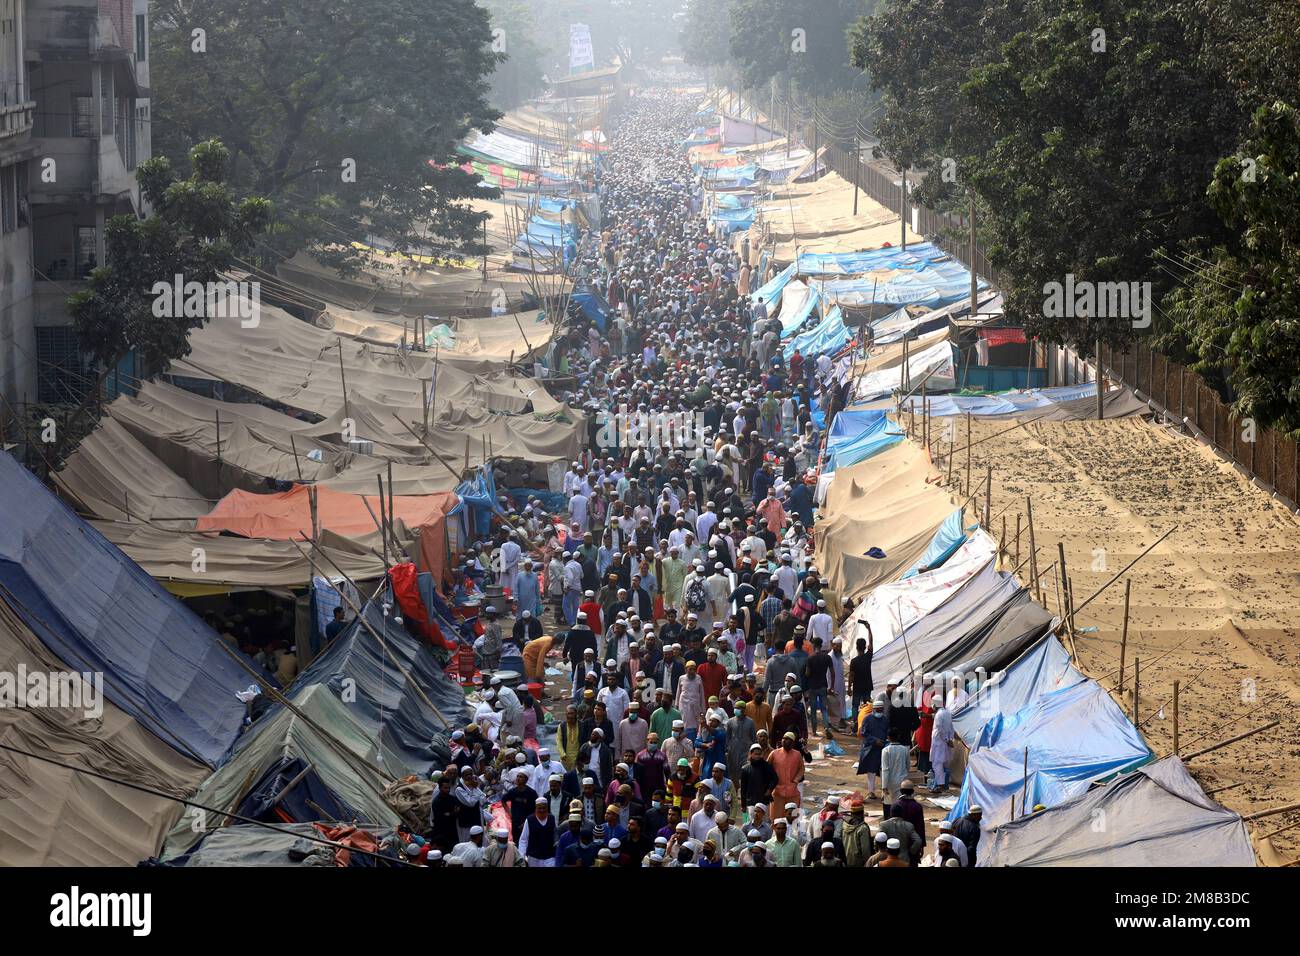 Tongi, Gazipur, Bangladesh. 13th Jan, 2023. The Bishwa (World) Ijtema is the second largest annual Muslim congregation in the world after the Hajj hq pic